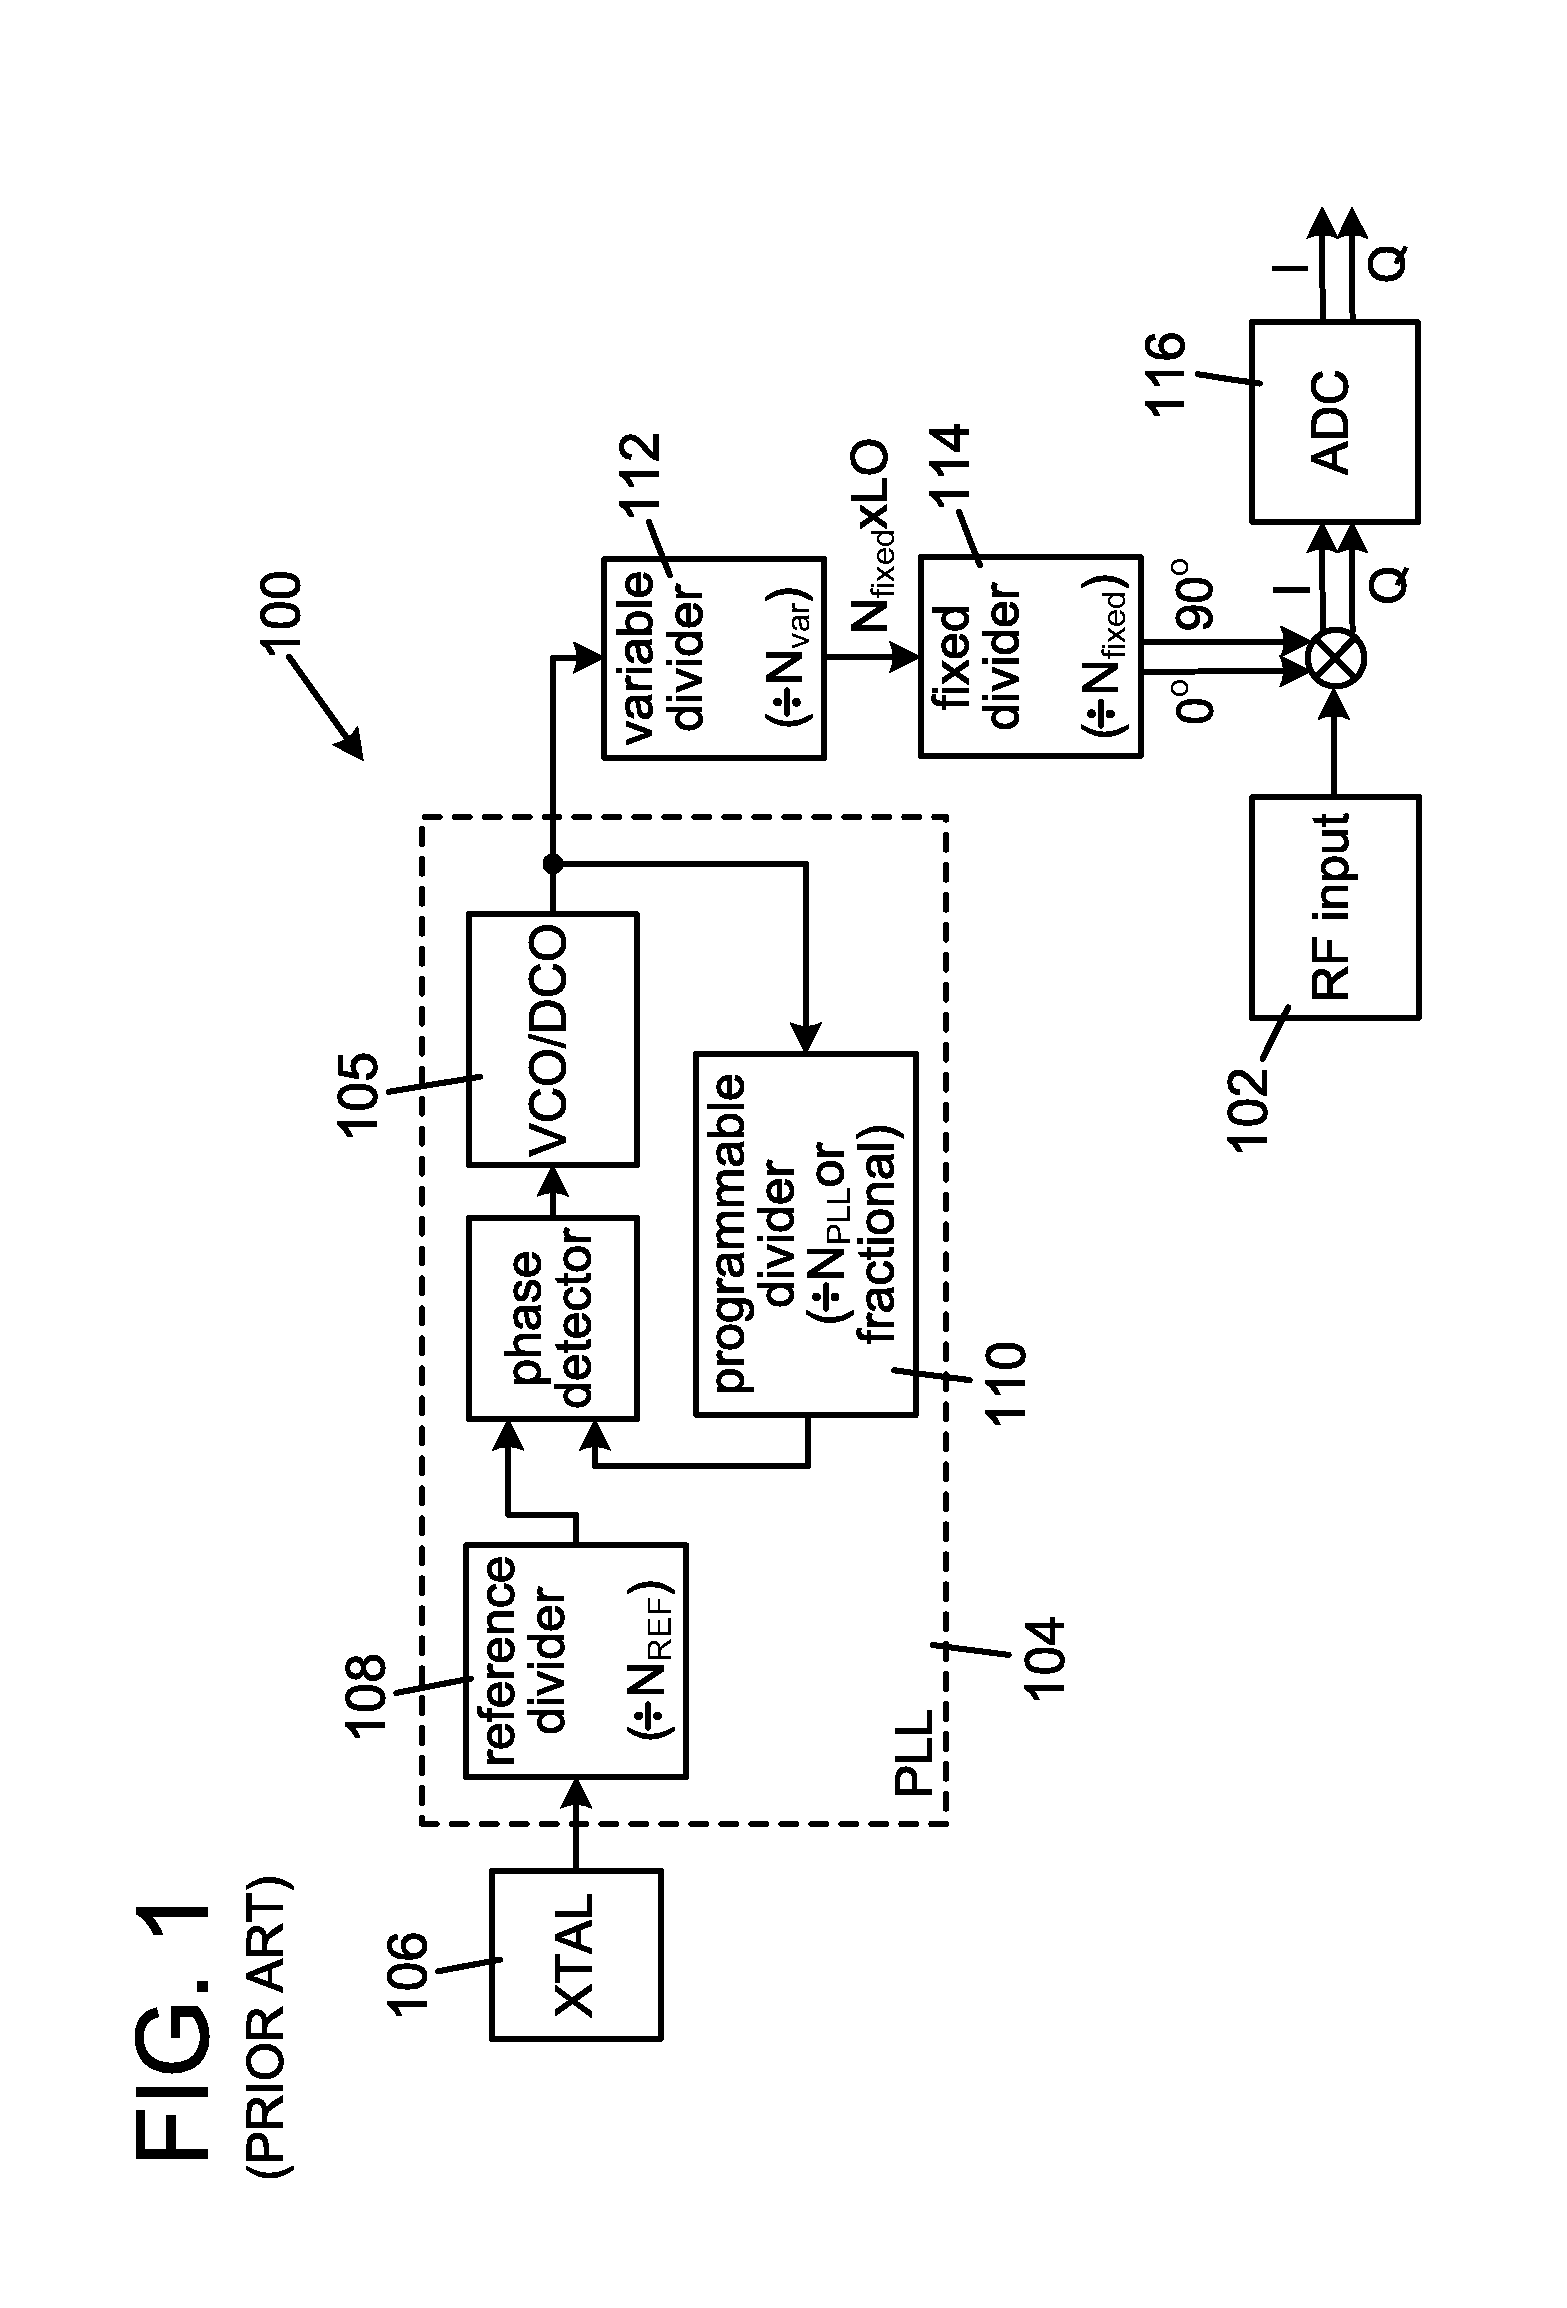 Method for using a multi-tune transceiver